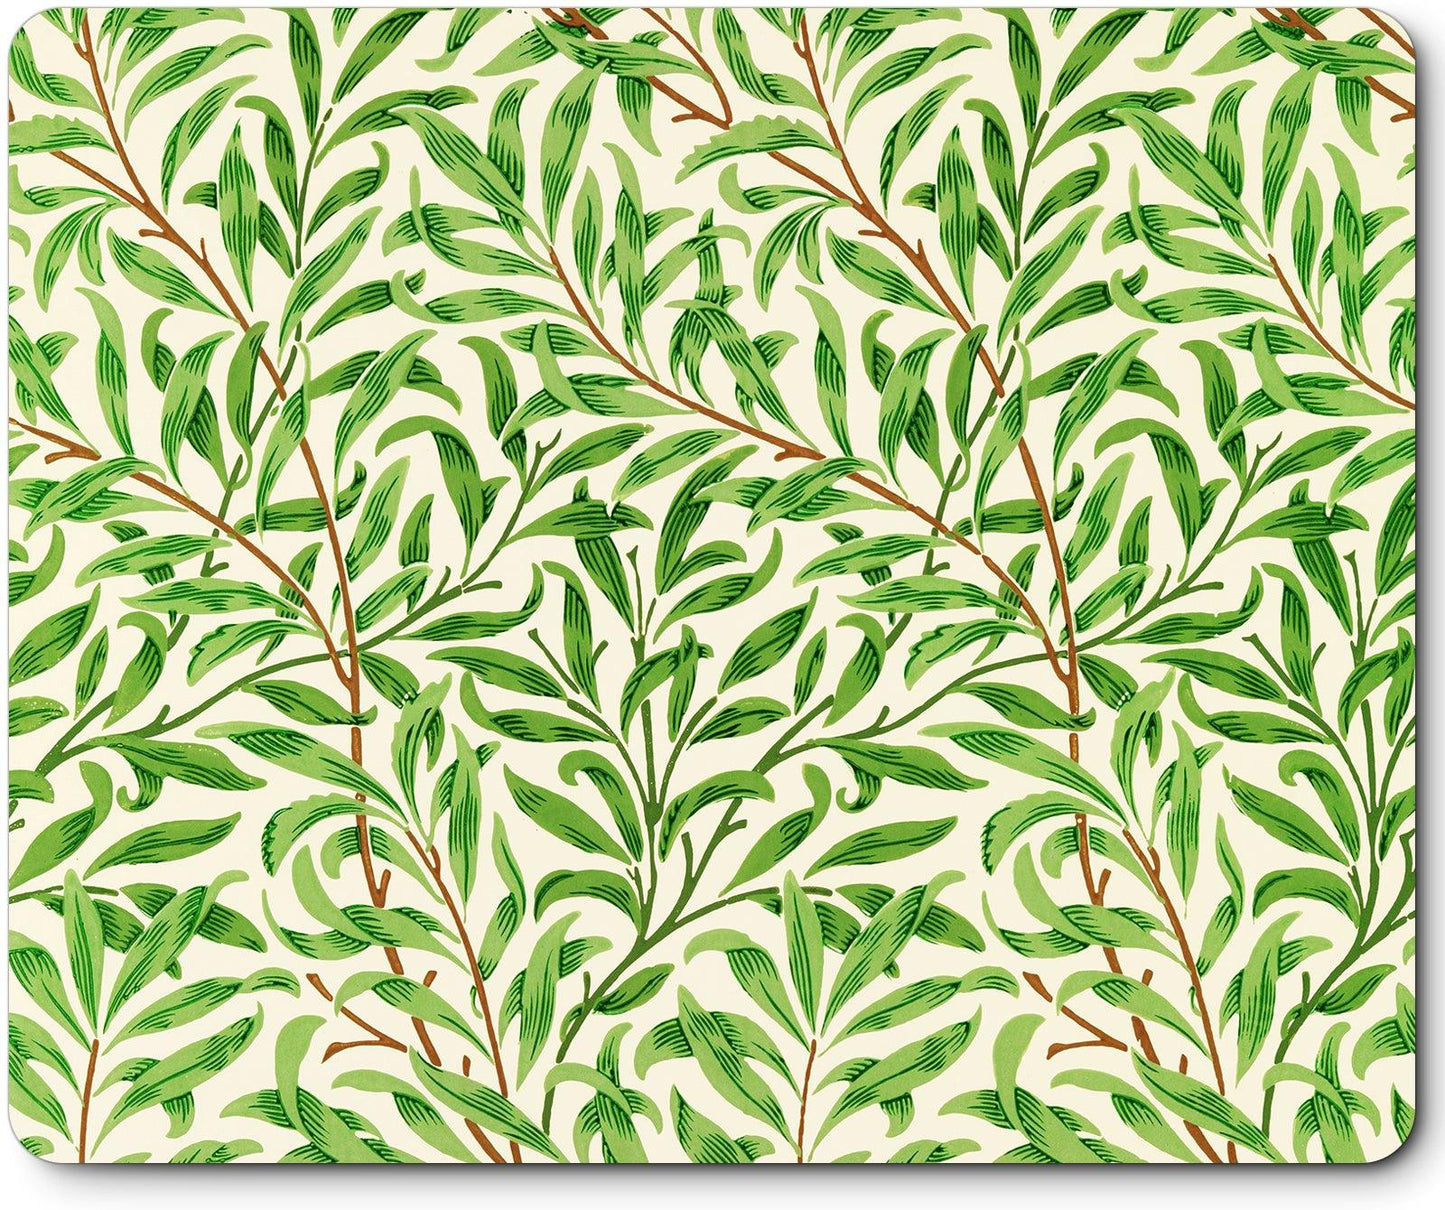 Art Square Mouse Pad 9.5 x 7.9 Inches (Willow Bough by William Morris) - Berkin Arts